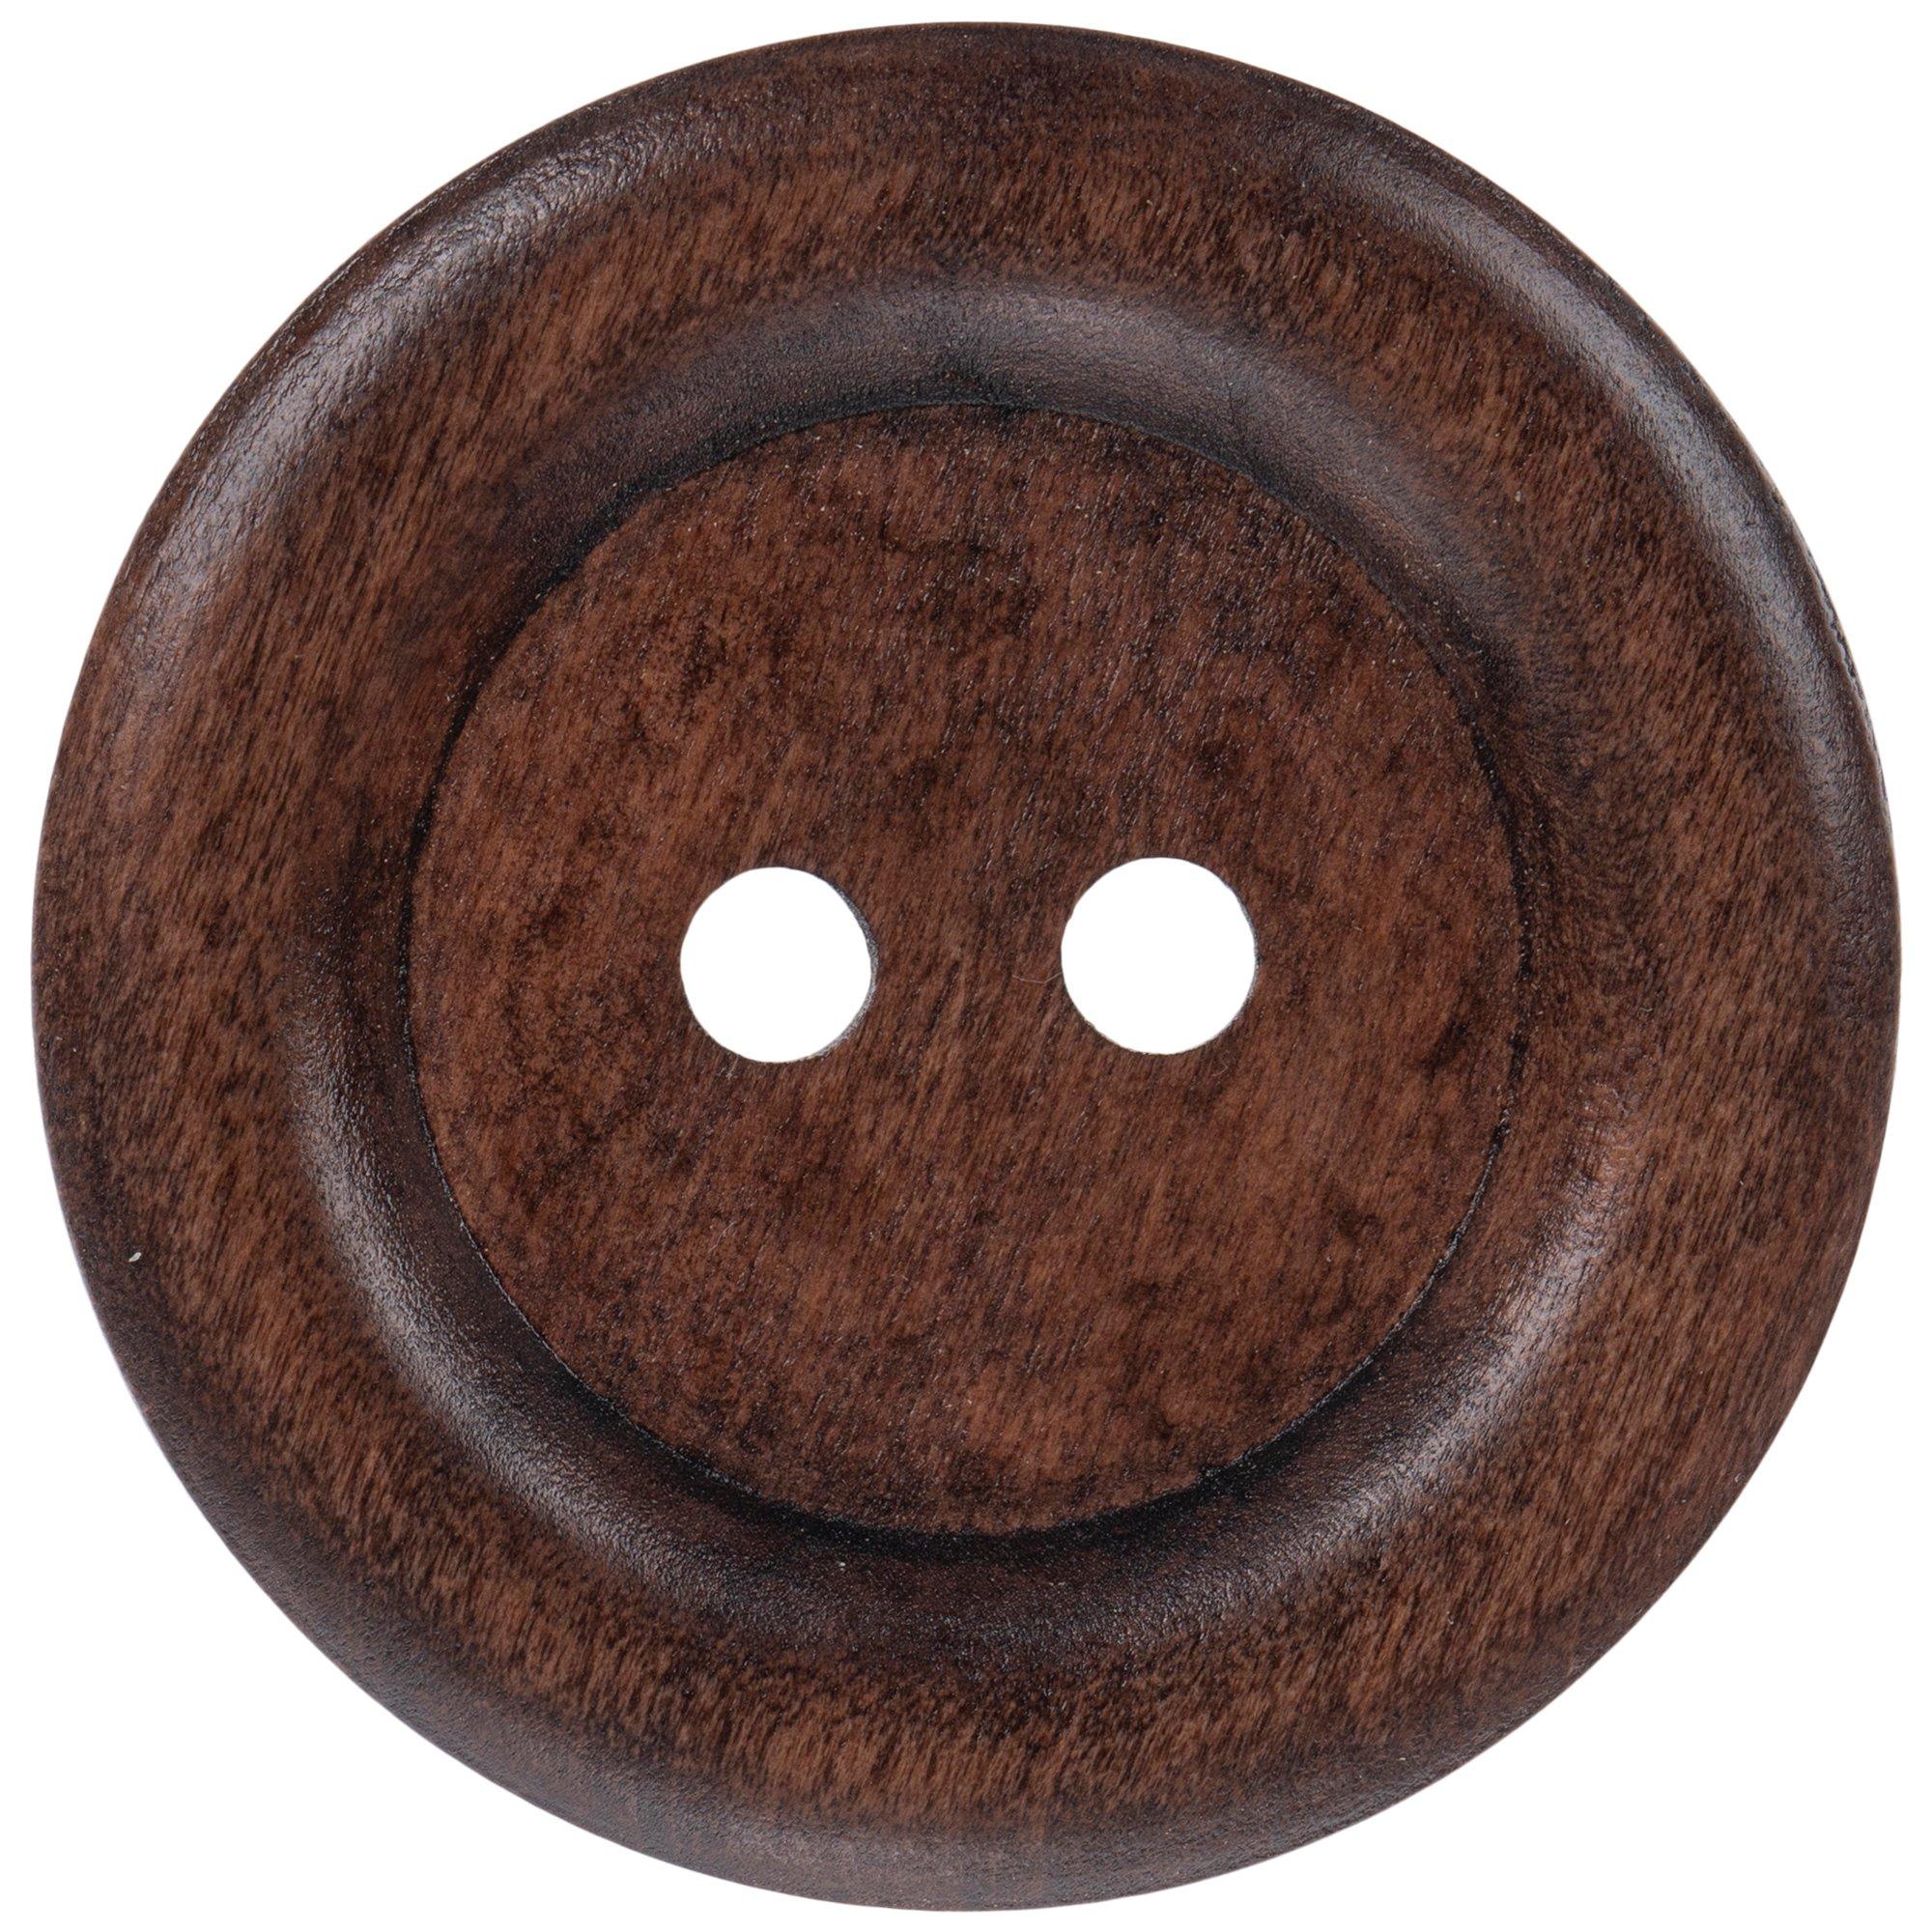 1 inch wooden buttons 6x reddish brown wooden buttons